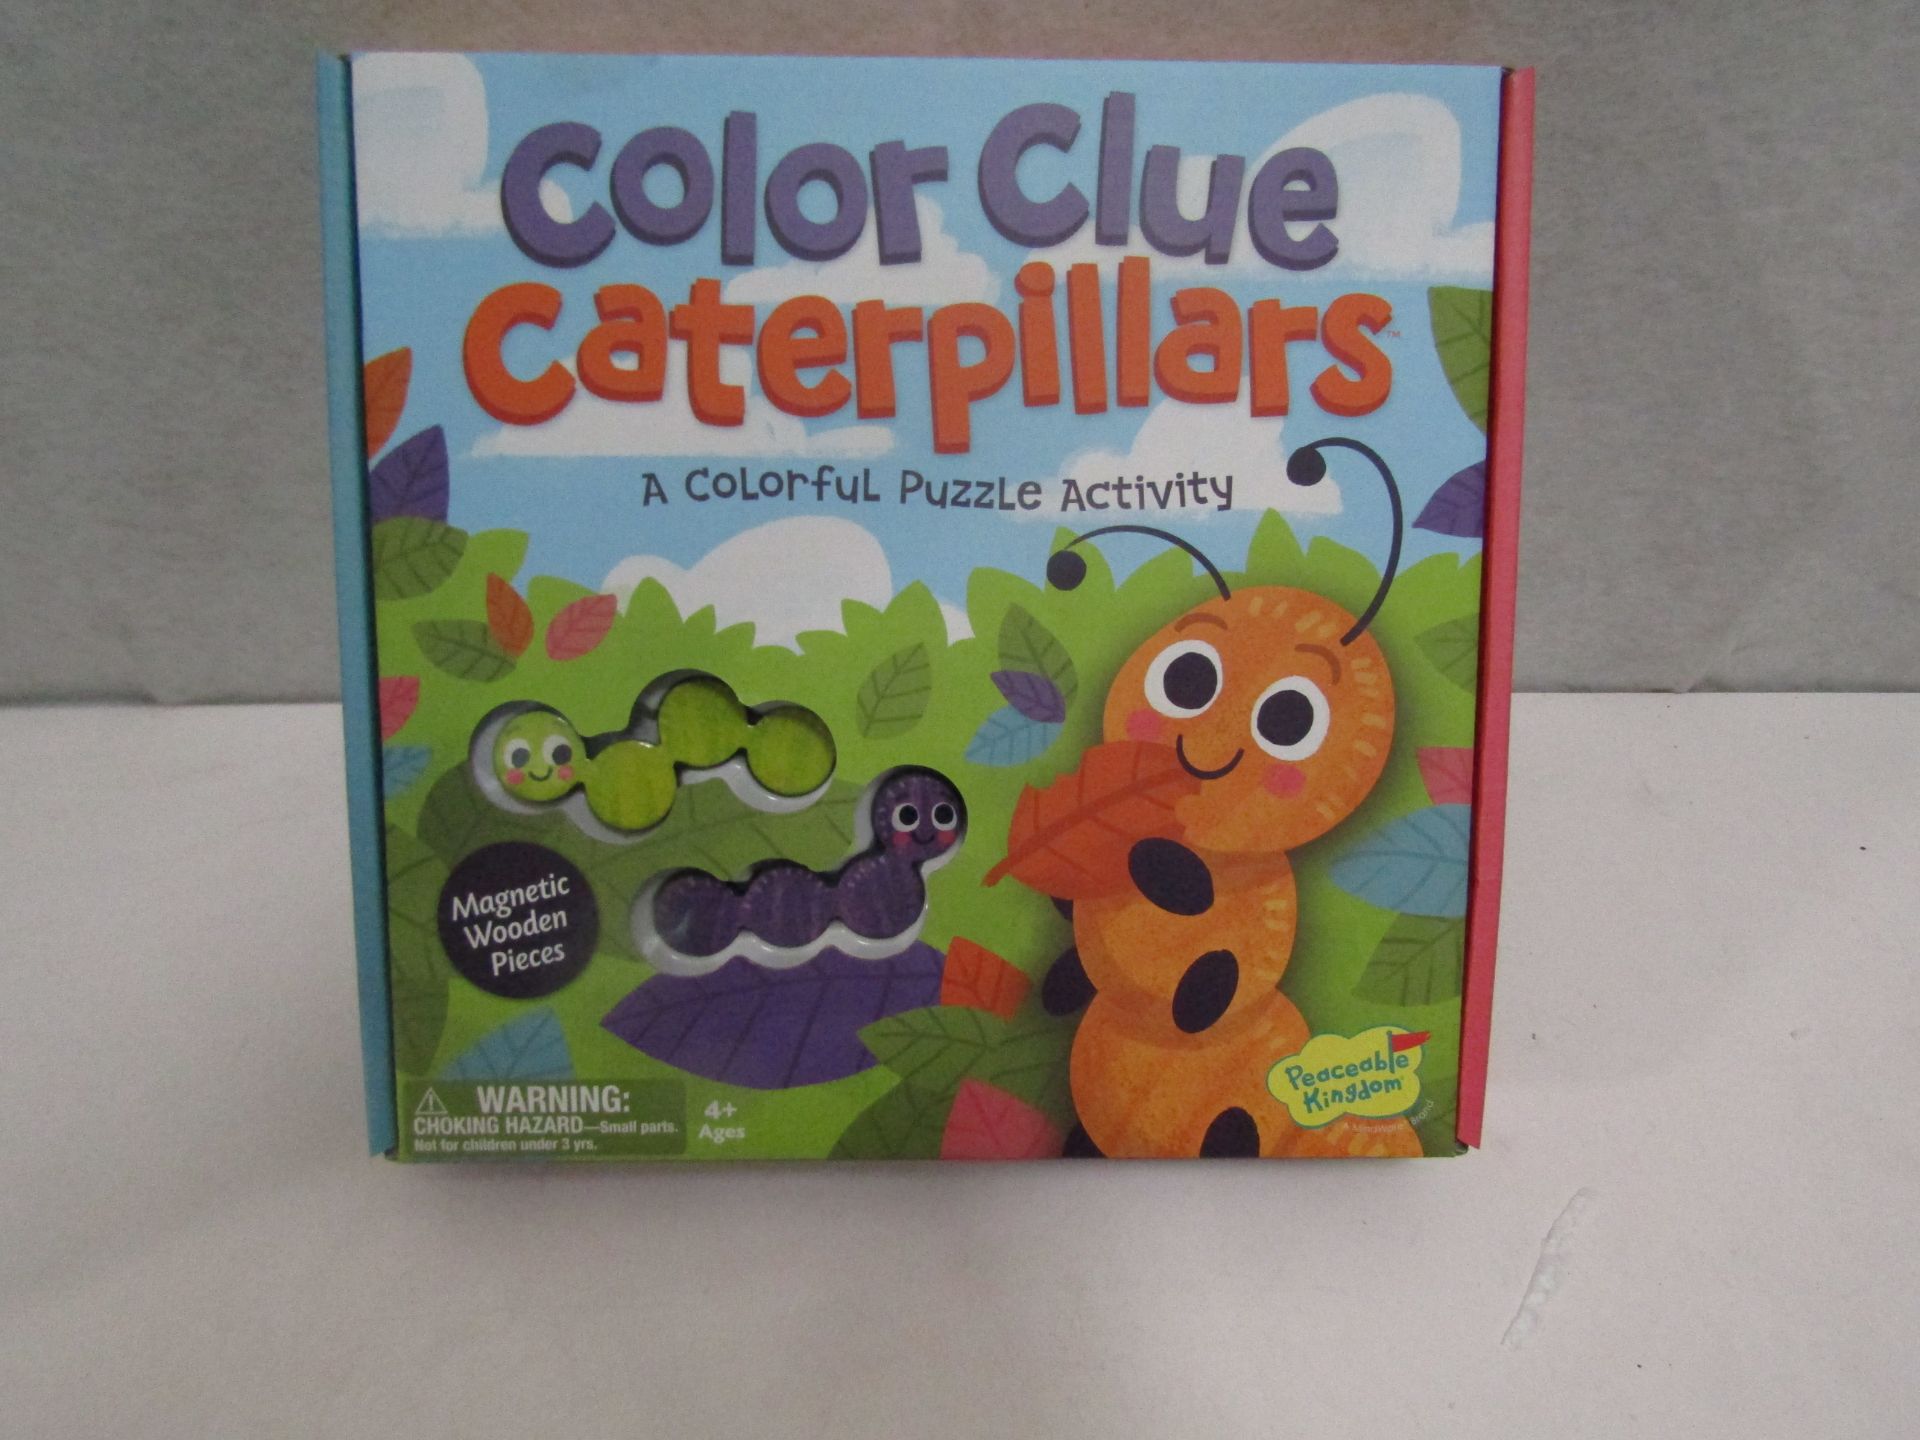 6x Peaceable Kingdom - Colour Clue Caterpillars Puzzle Activities - All New & Boxed.